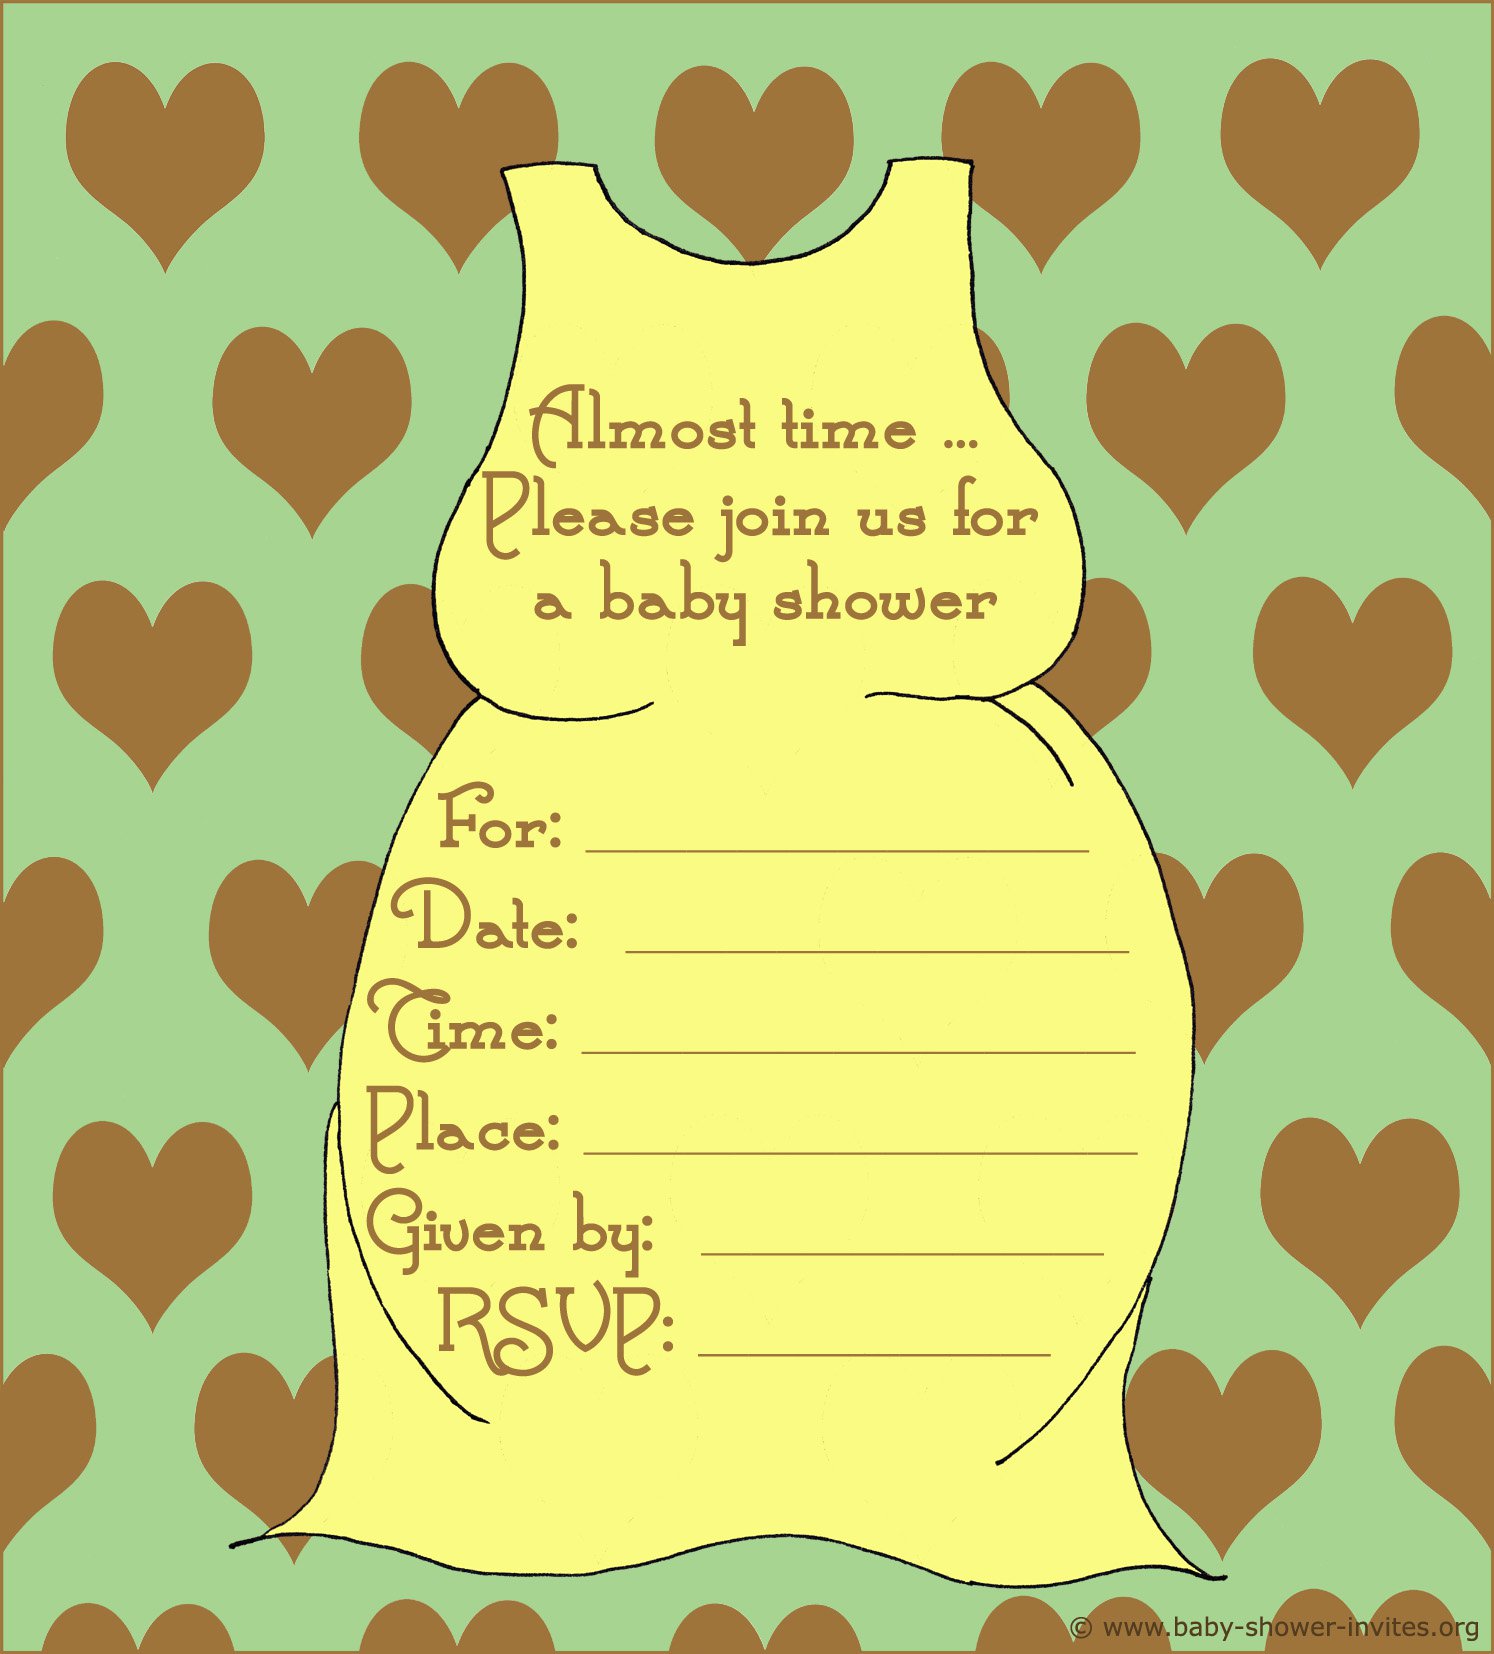 Full Size of Baby Shower:sturdy Baby Shower Invitation Template Image Concepts Baby Shower Poems Baby Shower Centerpieces Baby Shower Clip Art Baby Shower Flowers Baby Shower Stuff Arreglos Para Baby Shower